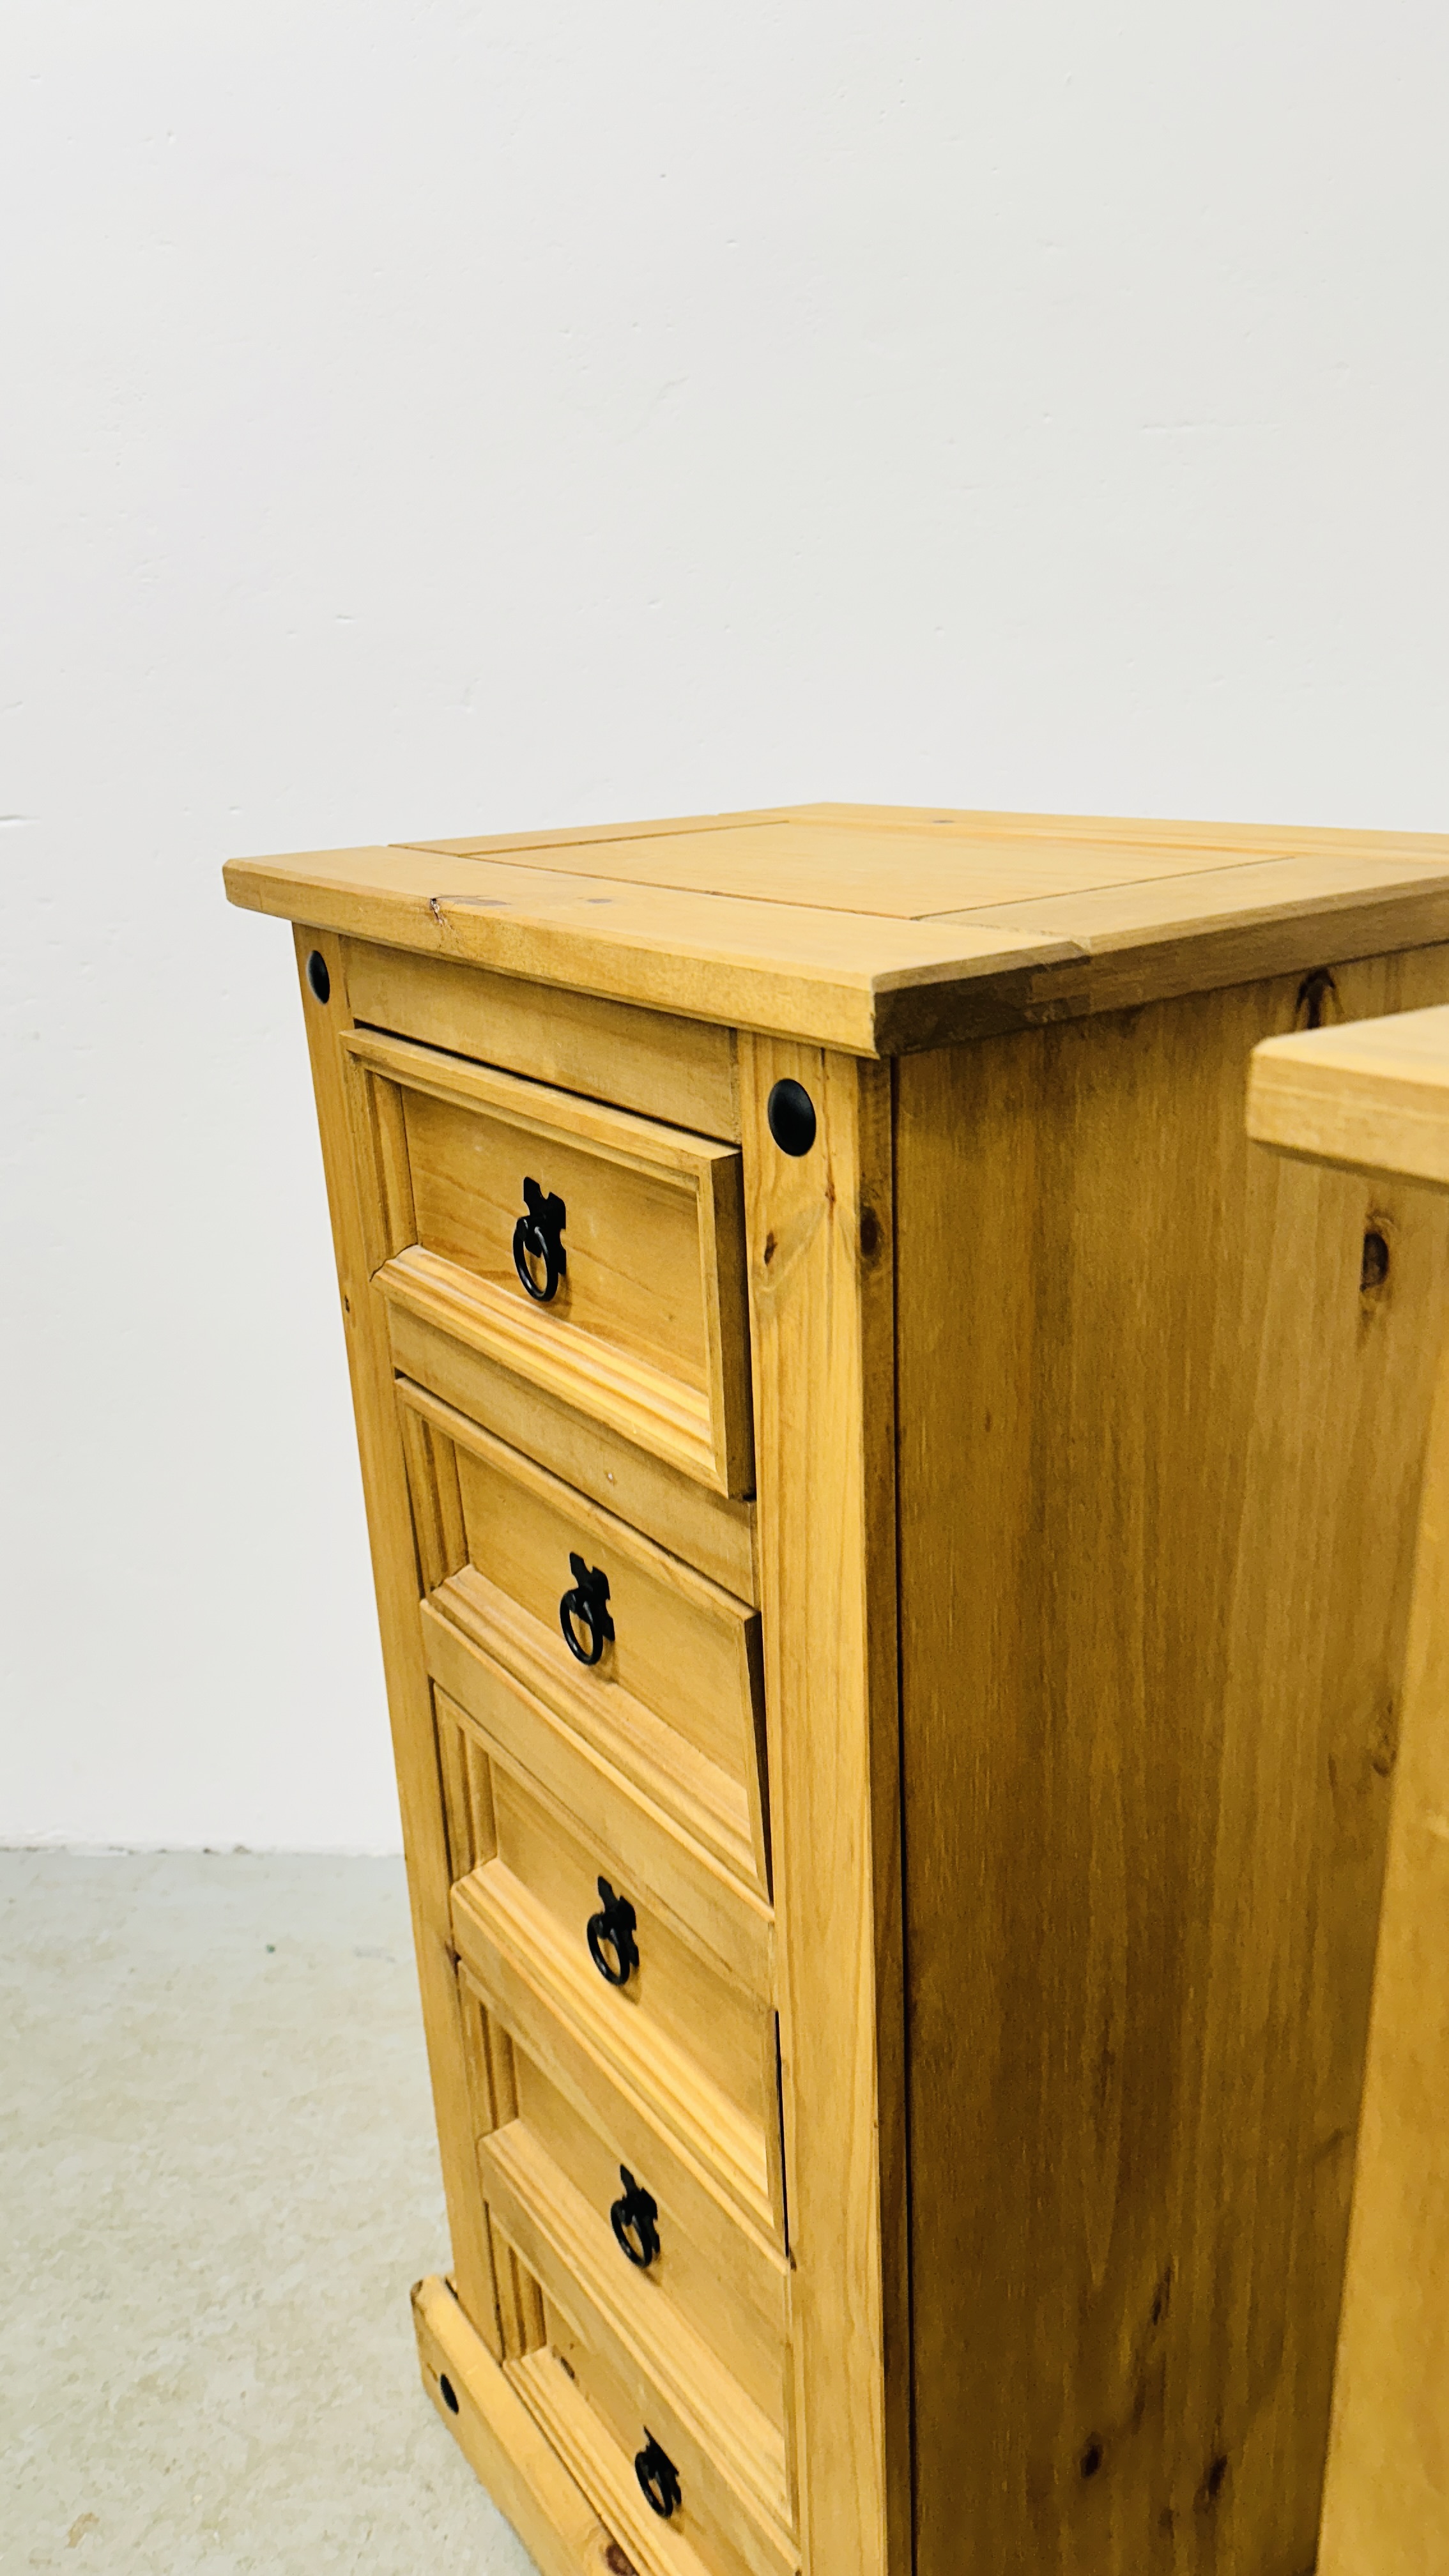 A PAIR OF FIVE DRAWER MEXICAN PINE "CORONA" TOWER CHESTS. - Image 6 of 9